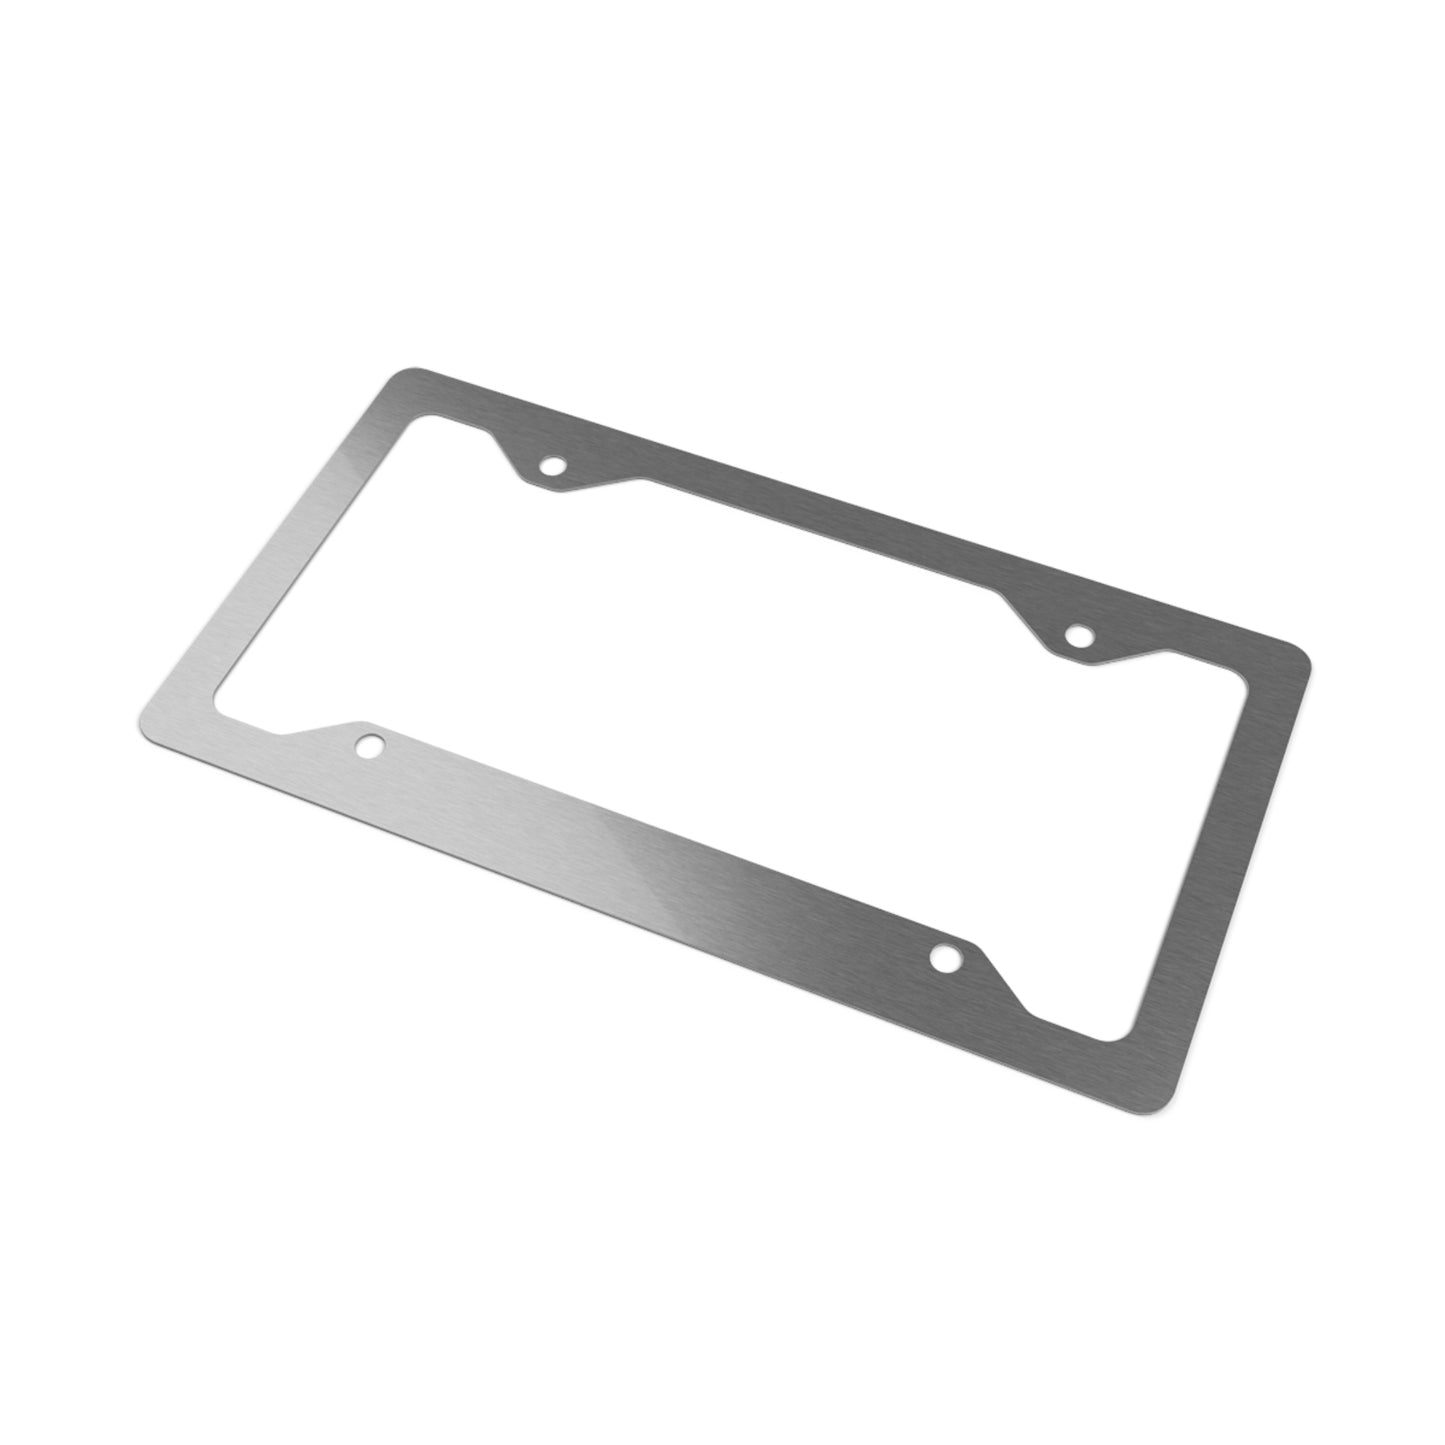 License to Express Metal Plate Frame